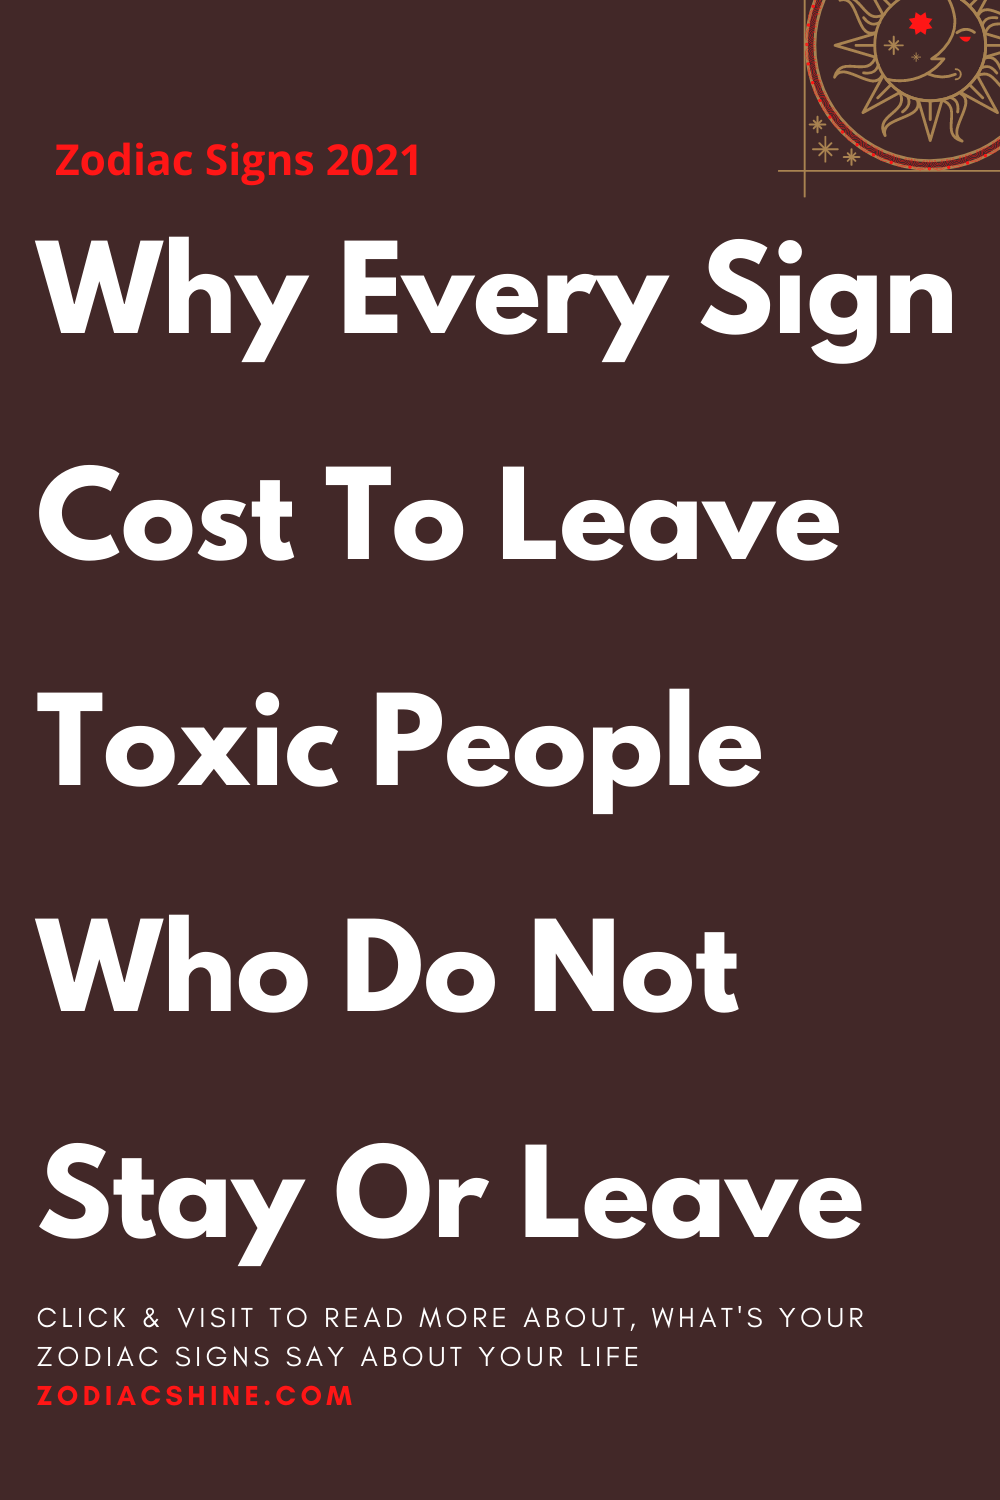 Why Every Sign Cost To Leave Toxic People Who Do Not Stay Or Leave